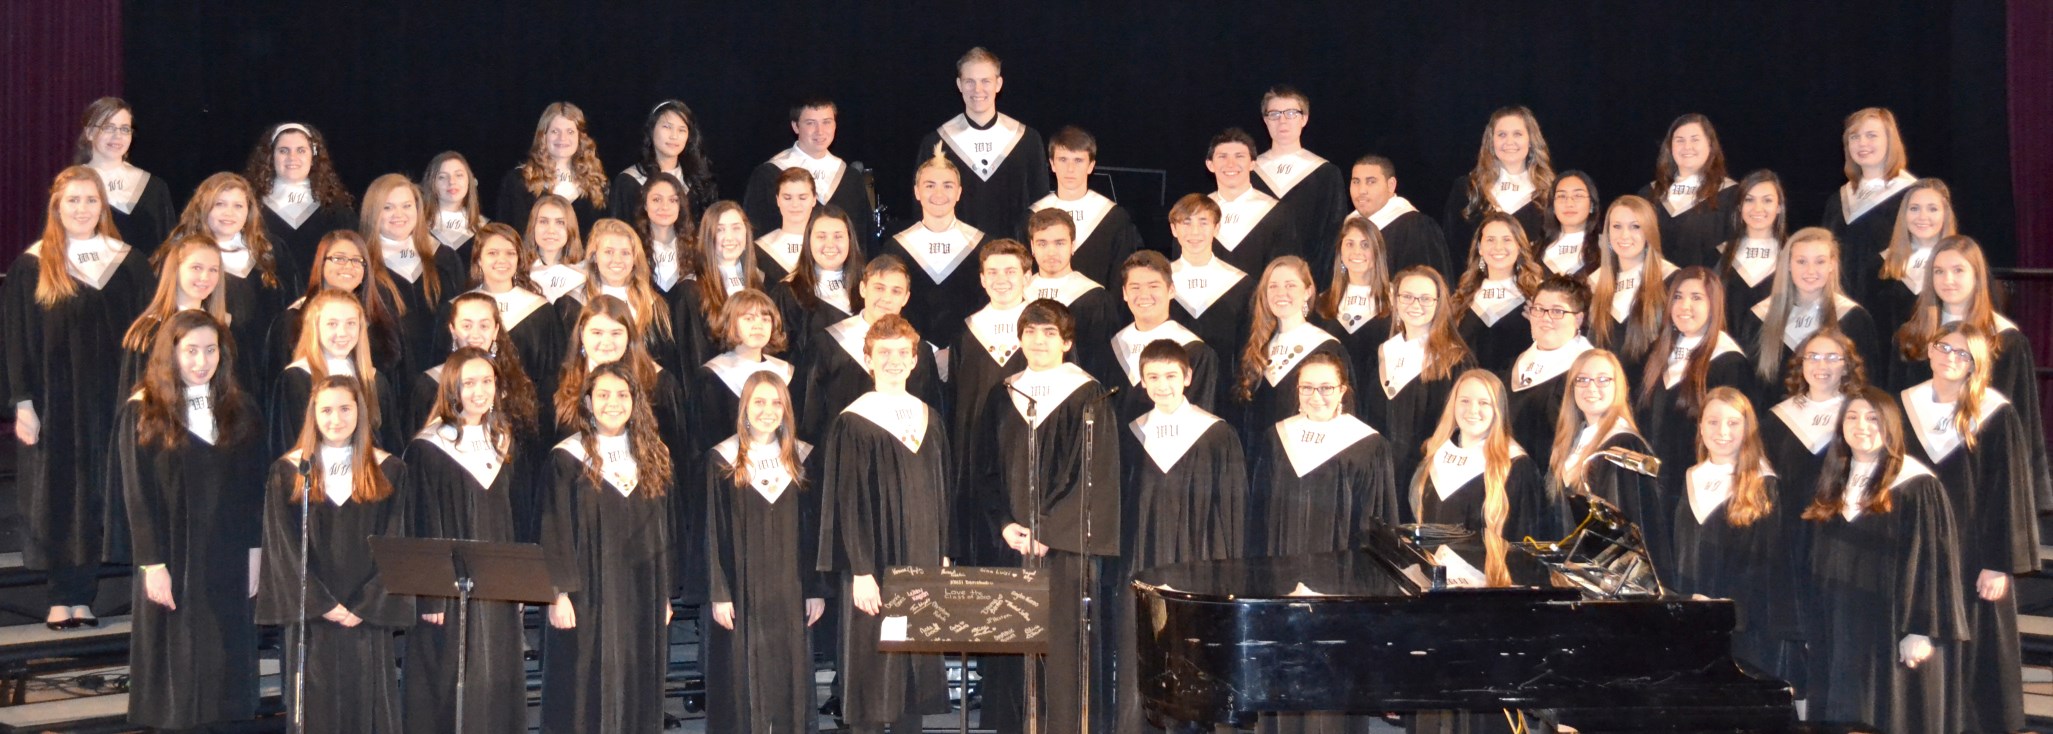 chorus group picture-2014-2015